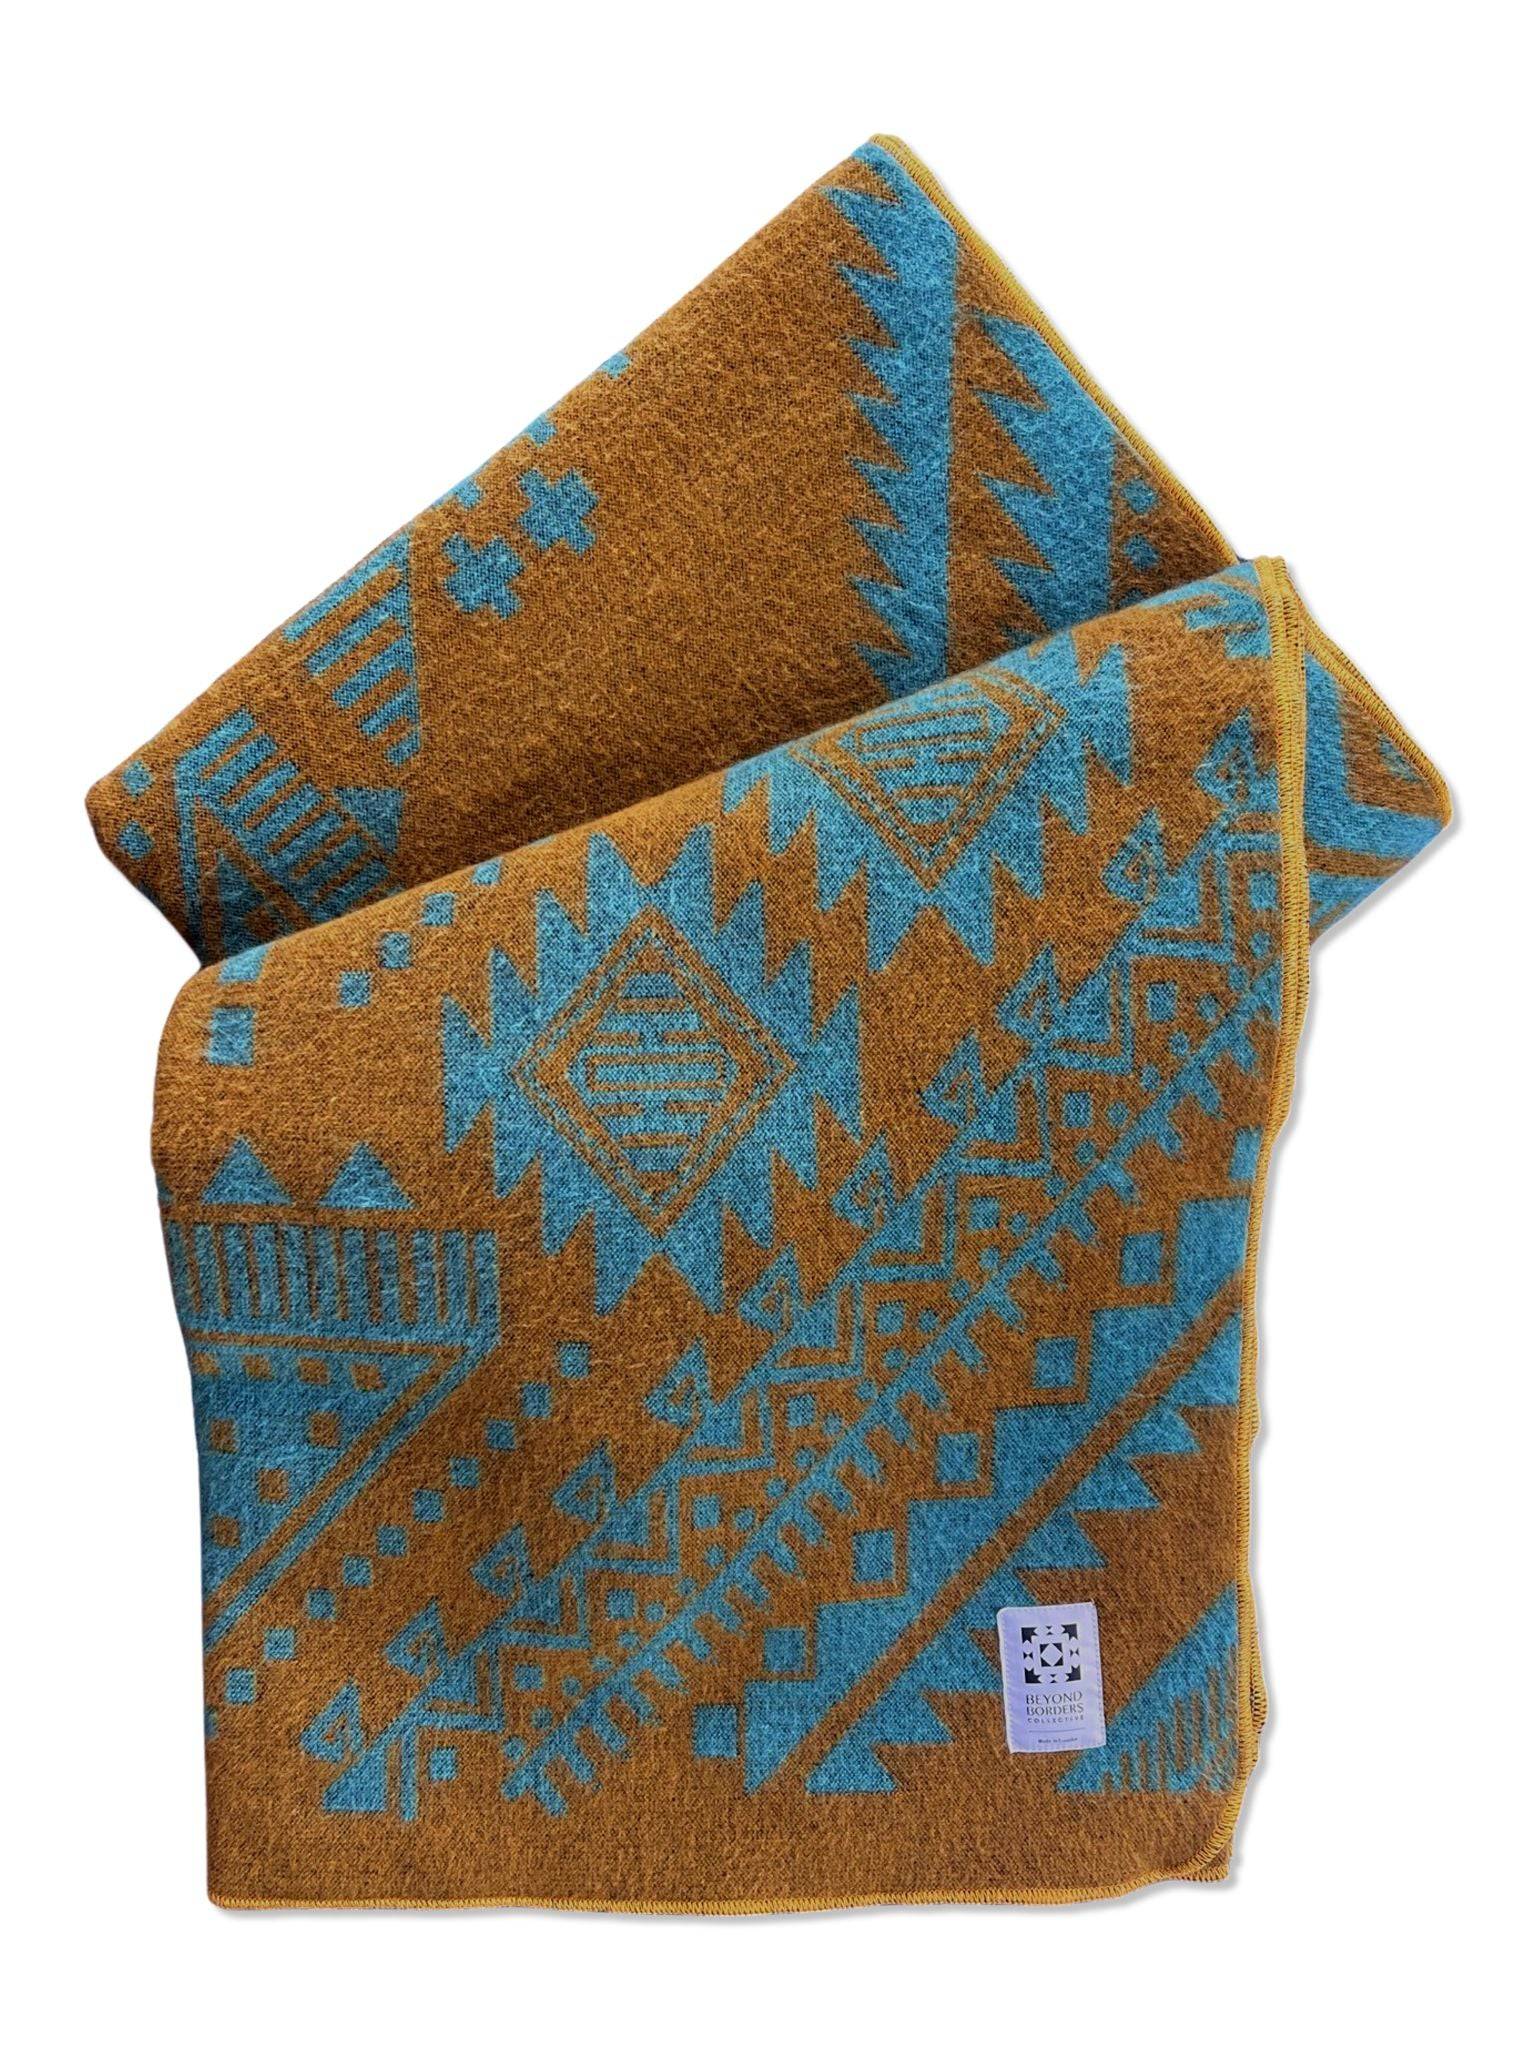 Quito Blanket - Mustard Yellow - Beyond Borders Collective